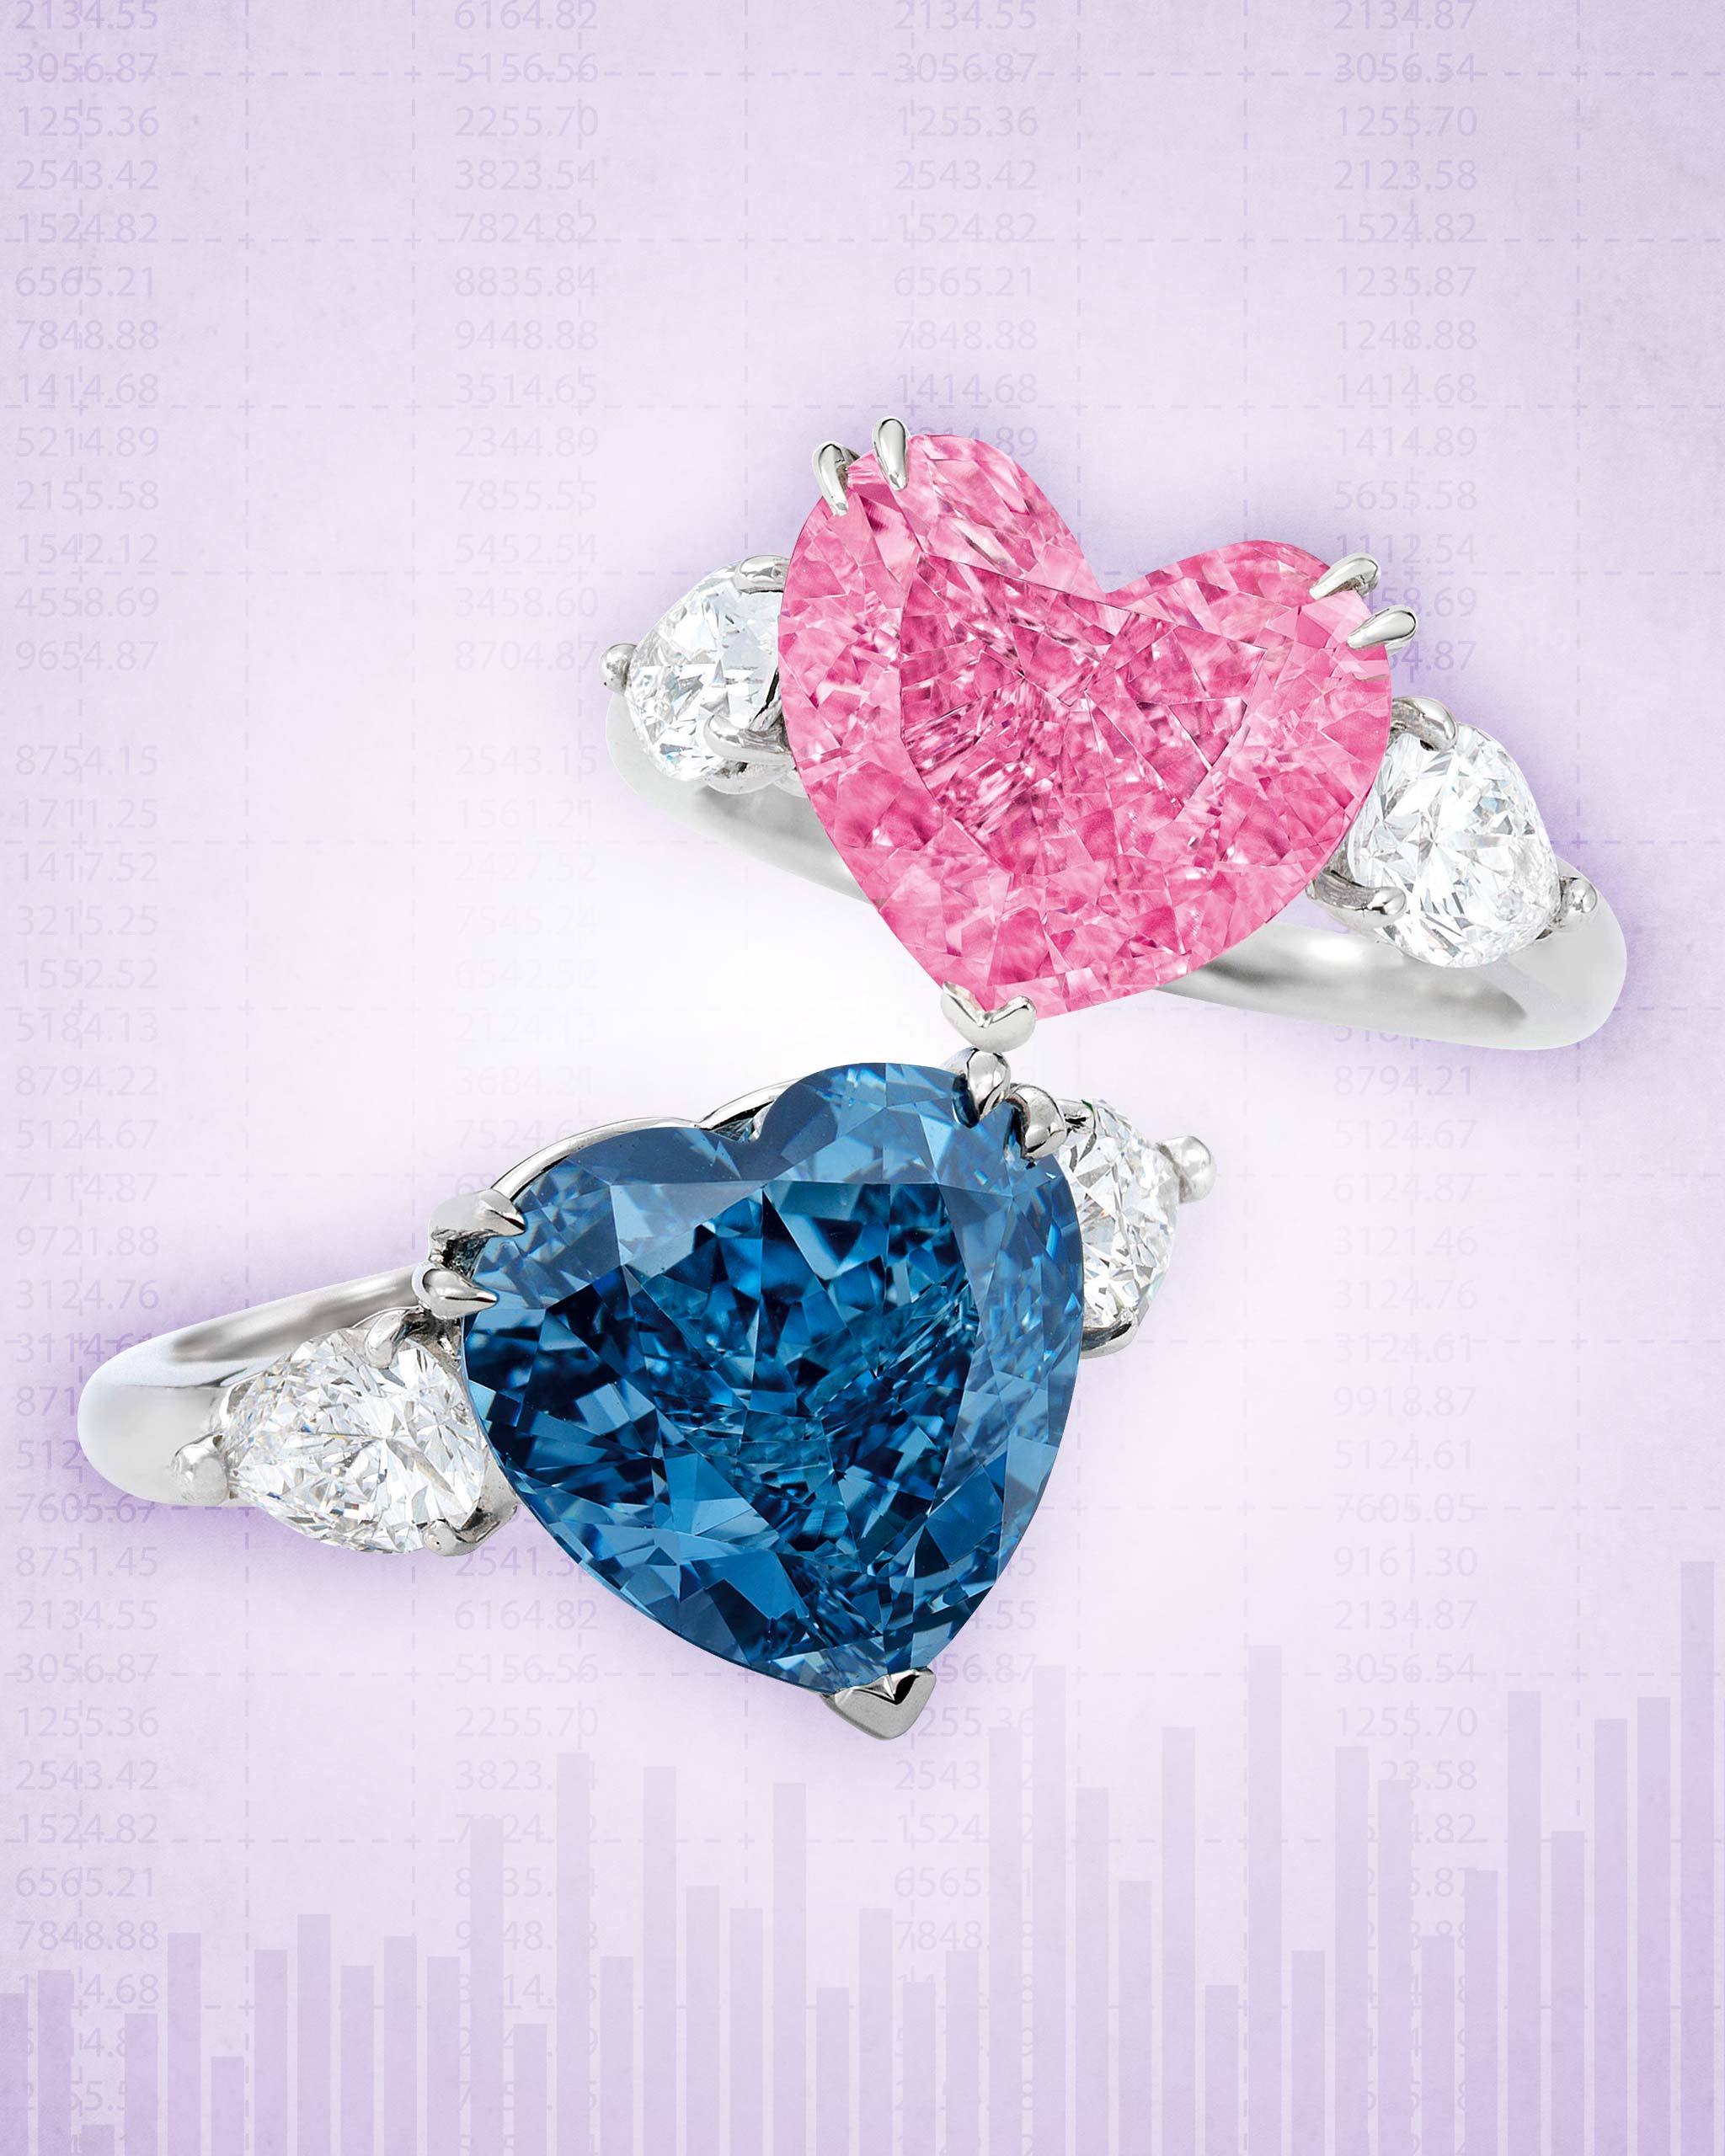 5-carat blue heart shaped diamond ring and 4-carat heart shaped pink diamond ring sold at the Sotheby’s jewelry auction